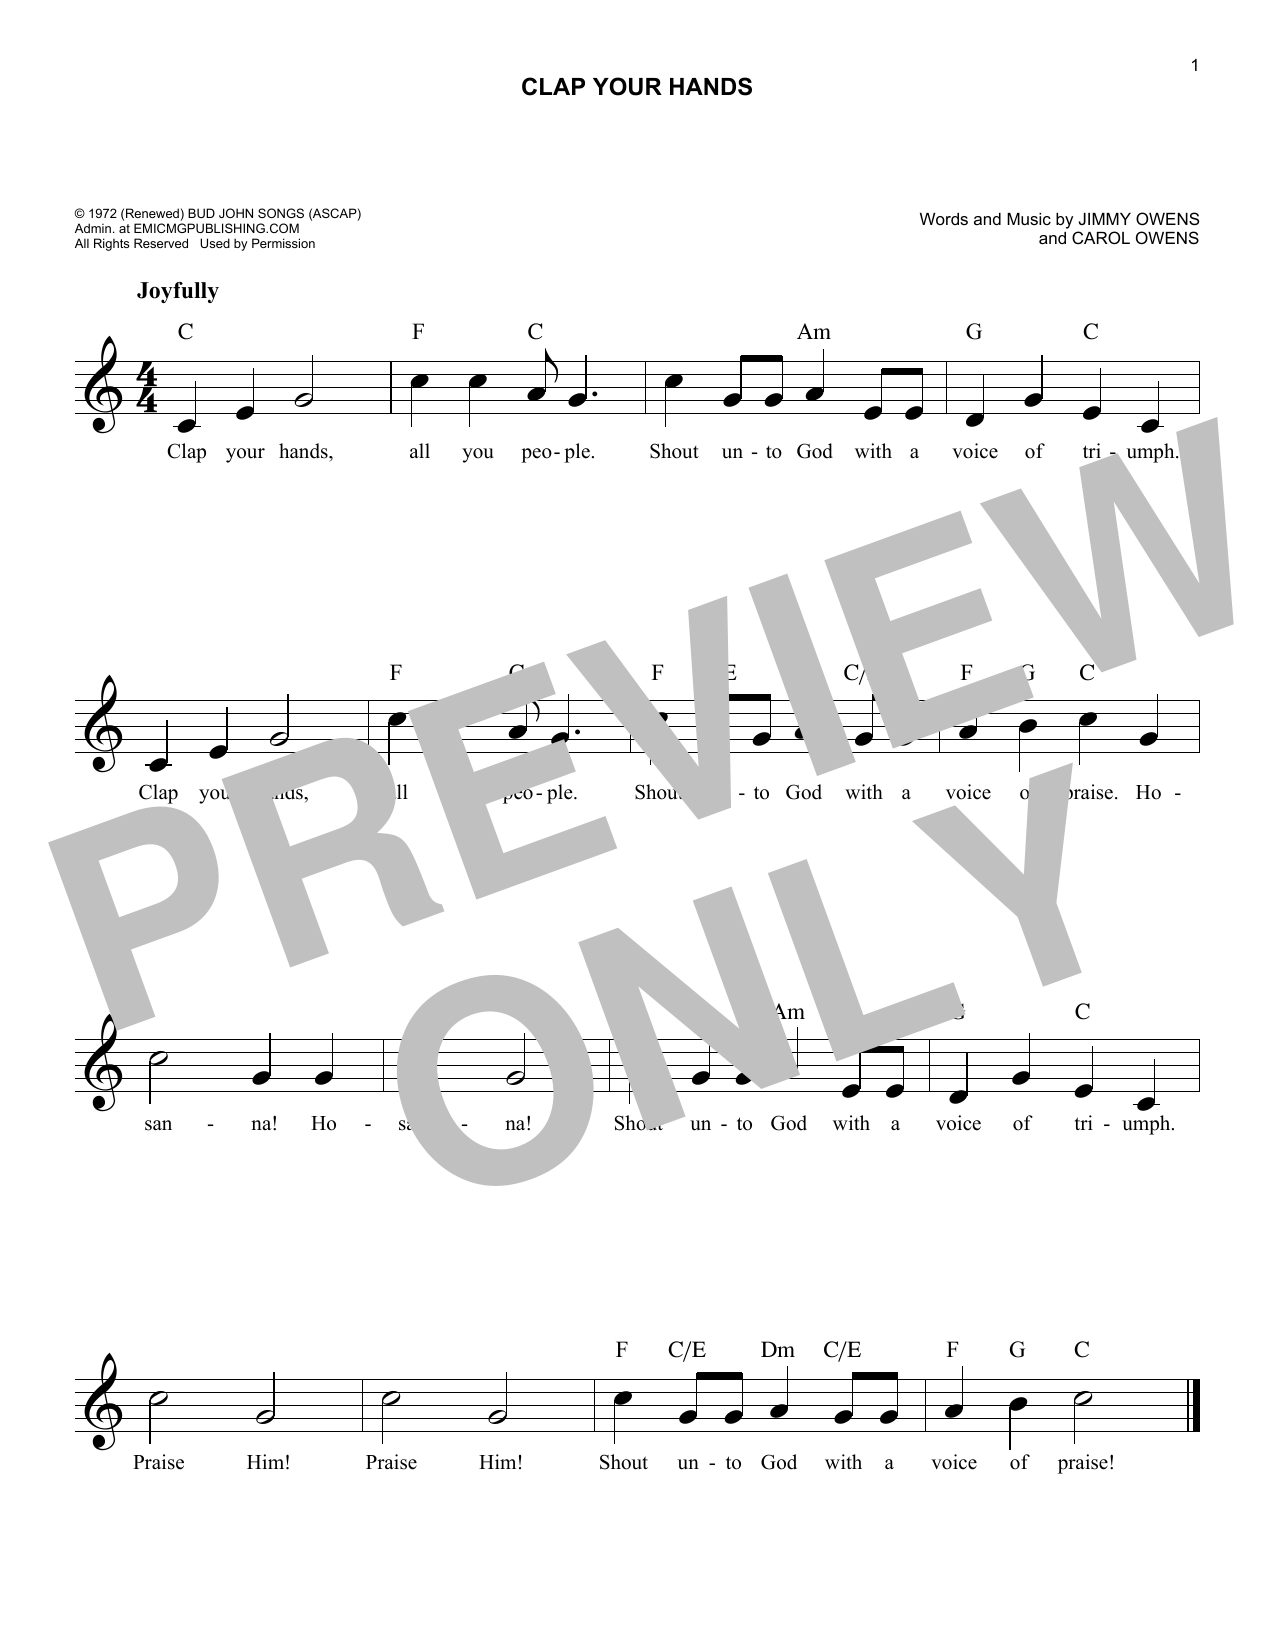 Download Carol Owens Clap Your Hands Sheet Music